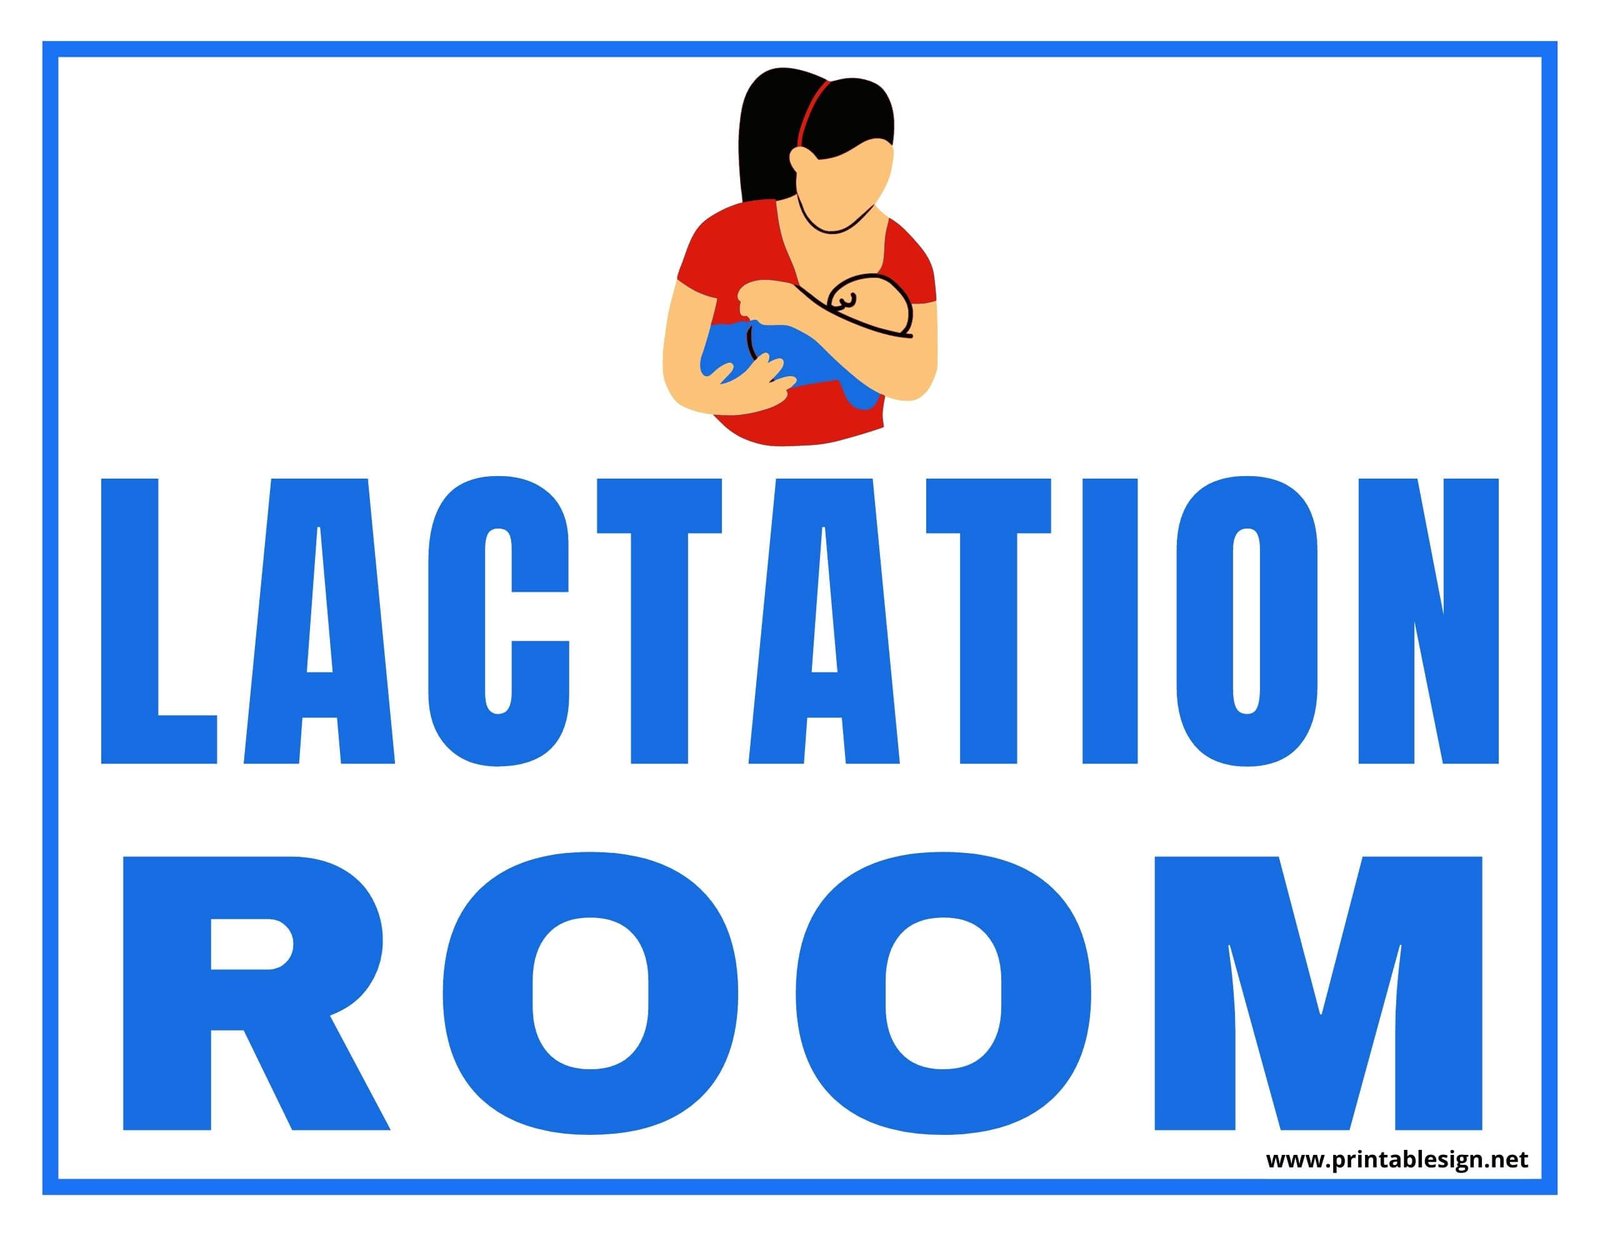 Lactation Room Sign FREE Download